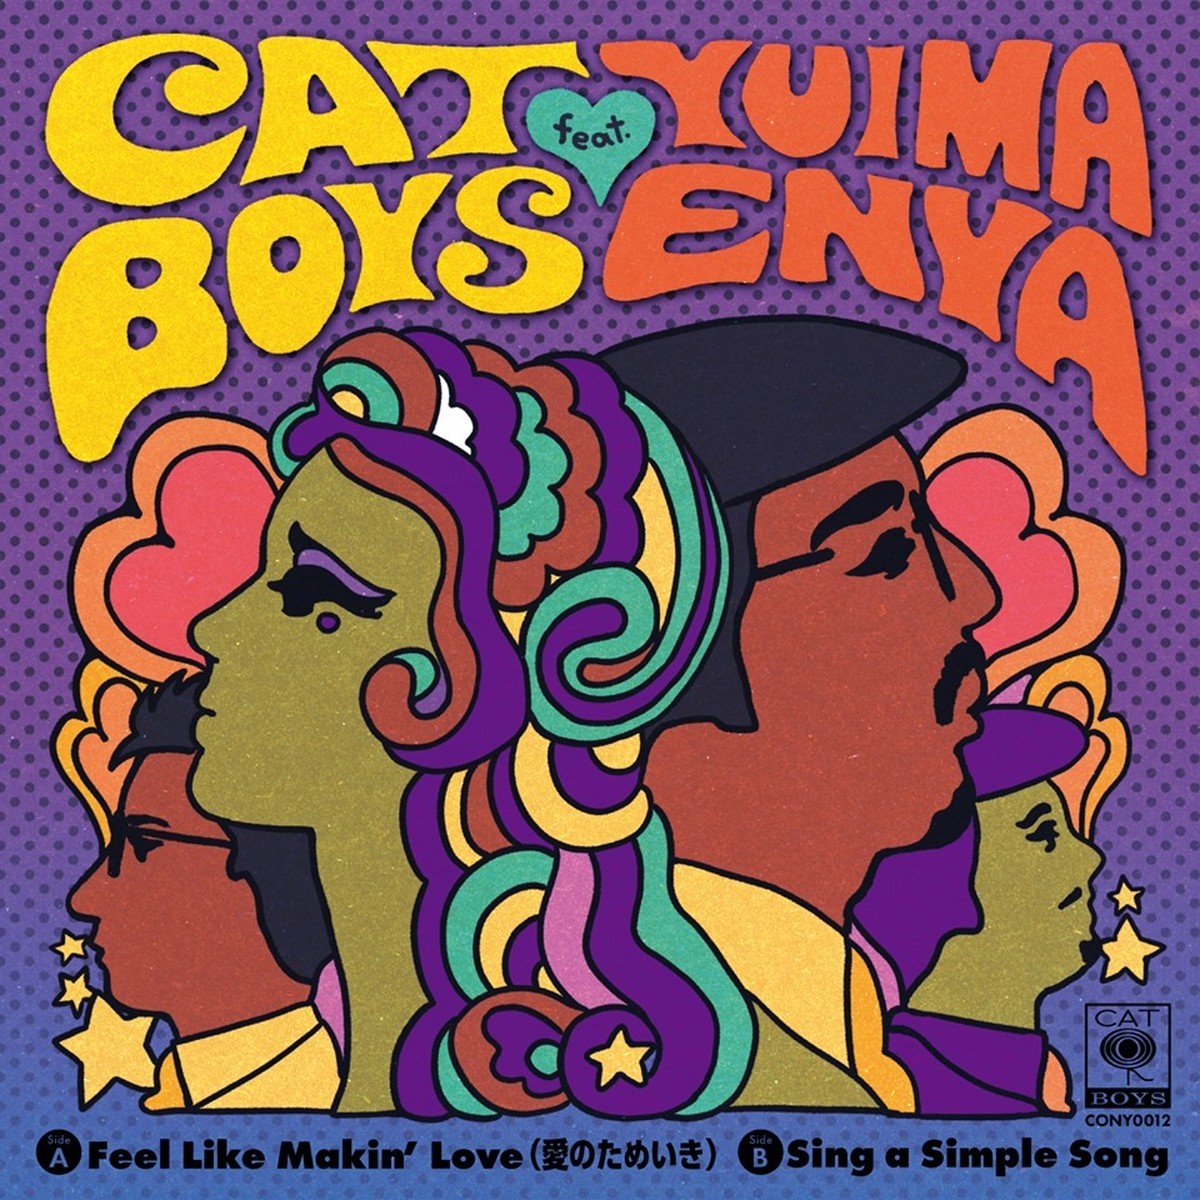 Cat Boys Feat Yuima Enya Feel Like Makin Love 愛のためいき Sing A Simple Song 7 Parktone Records Online Store